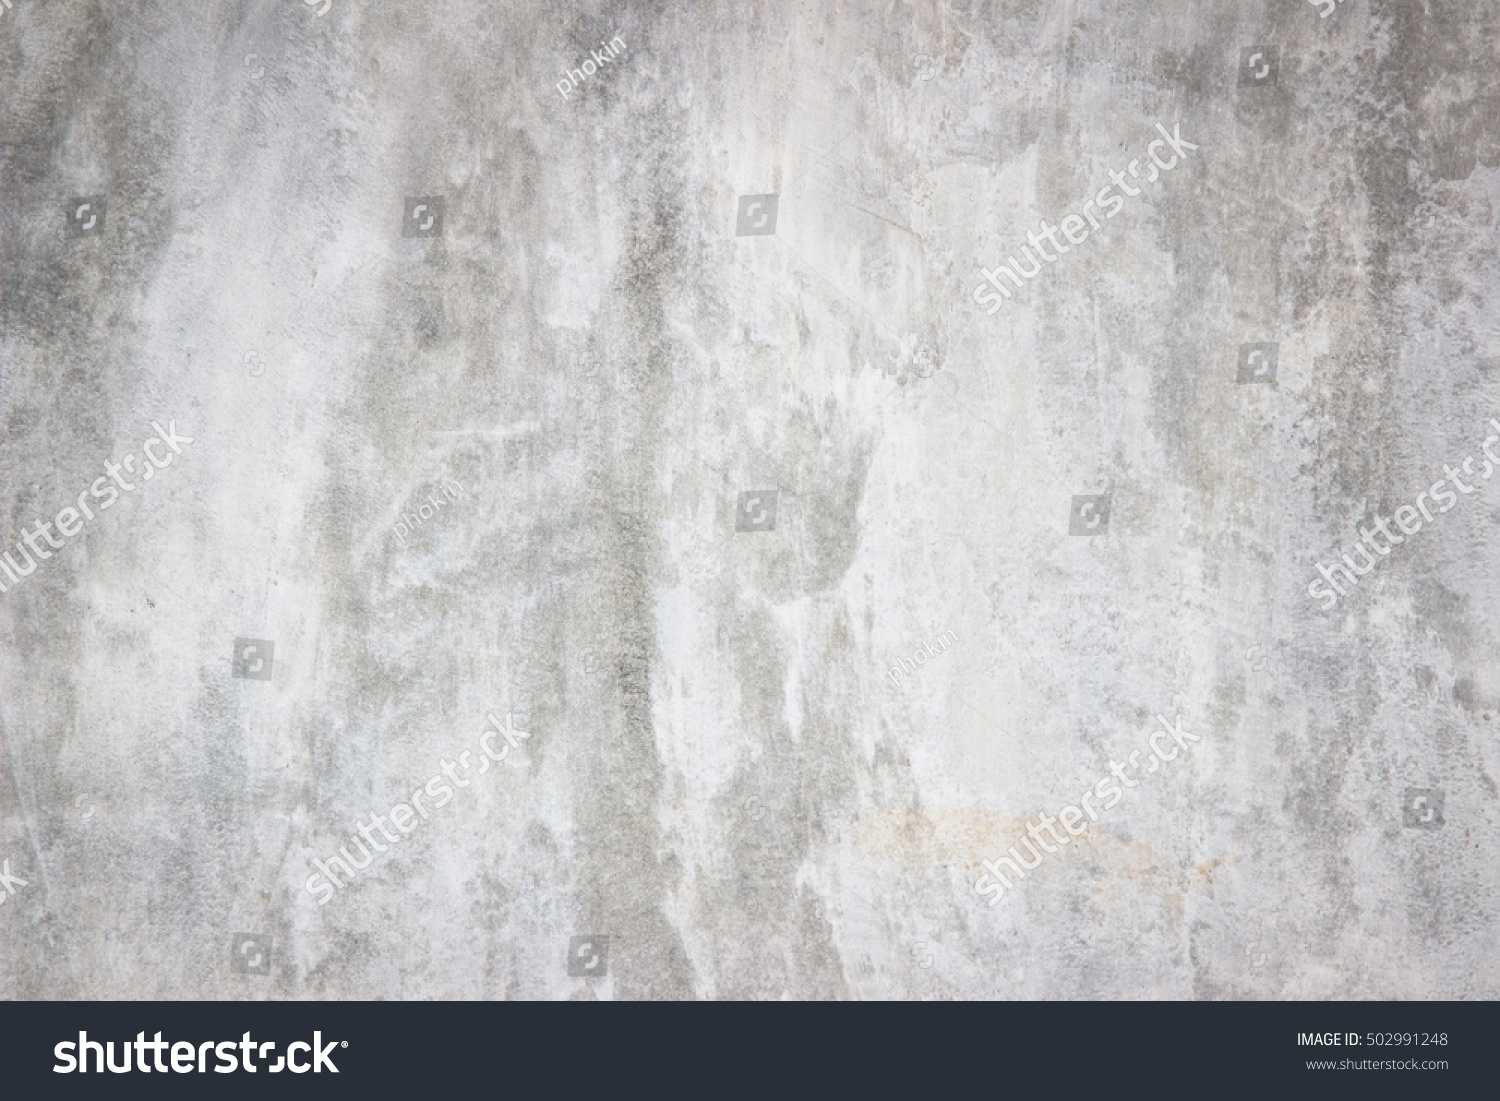 art concrete texture for background in black. color dry scratched surface wall cover sand art abstract colorful relief scratches shabby vintage concrete grey detail stone covering. #502991248